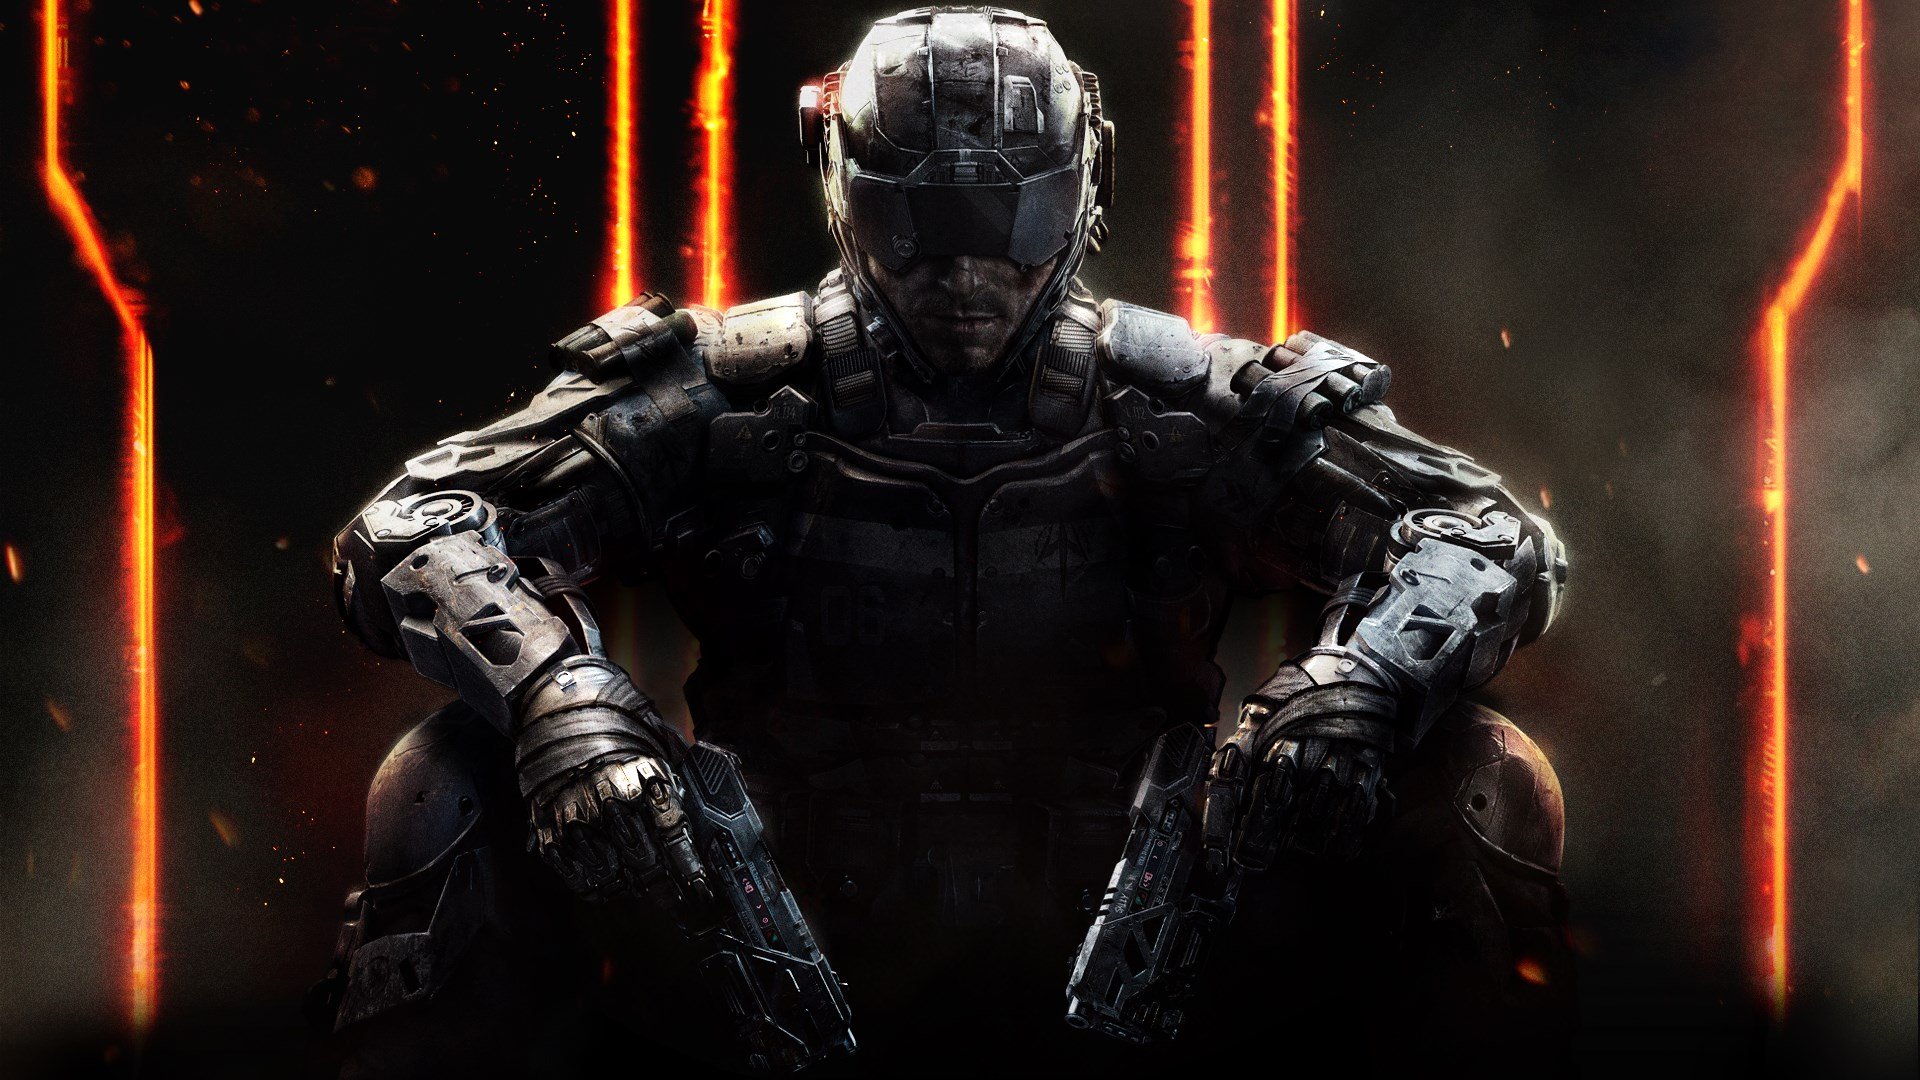 Call of Duty: Black Ops III cover image